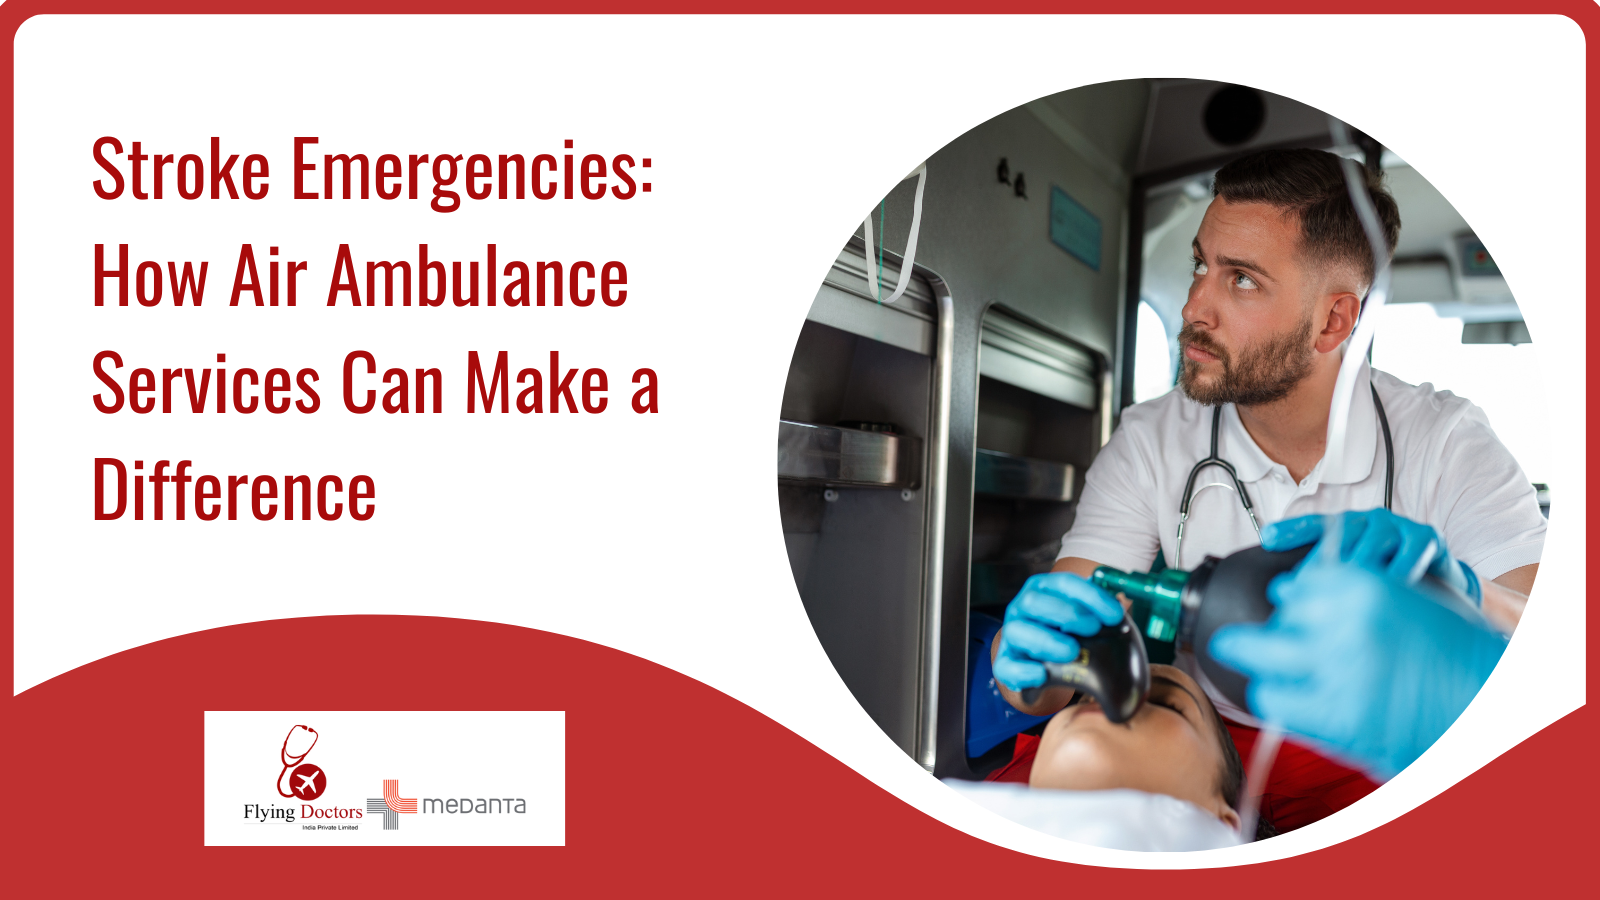 Stroke Emergencies: How Air Ambulance Services Can Make a Difference